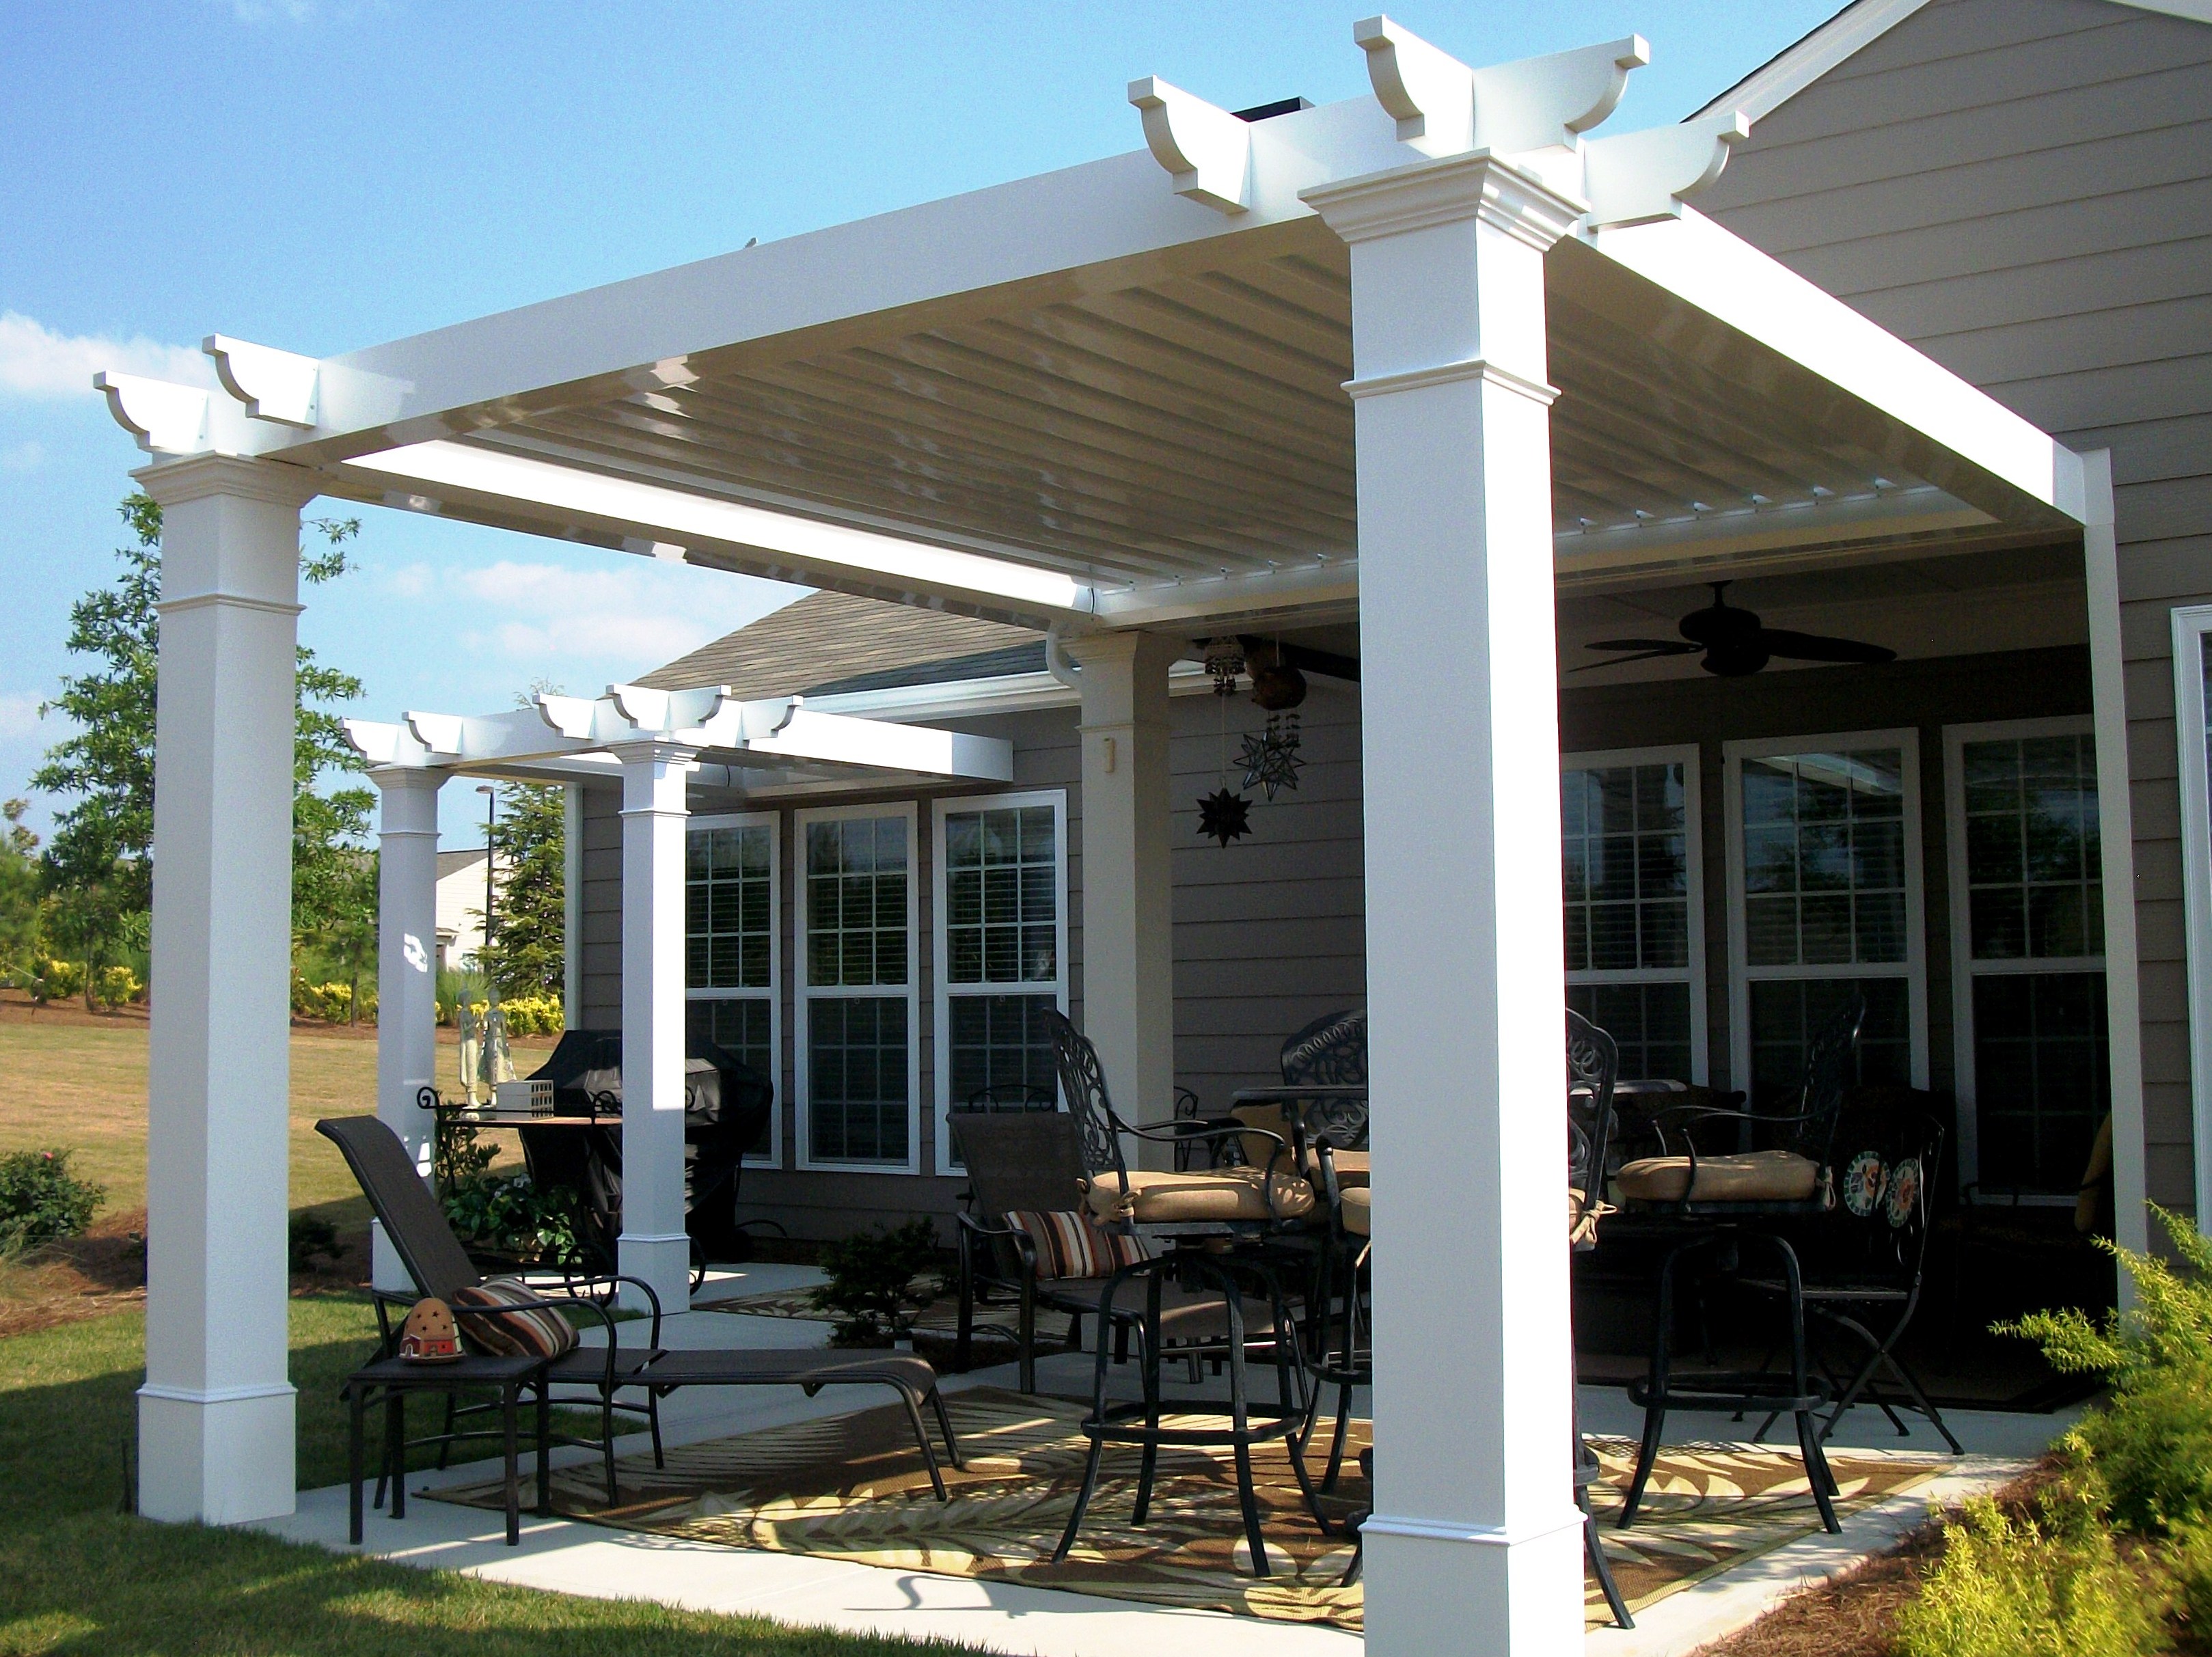 Terrace roof architecture great pergola kits with garden furniture on roof tree structure KUXDNCJ